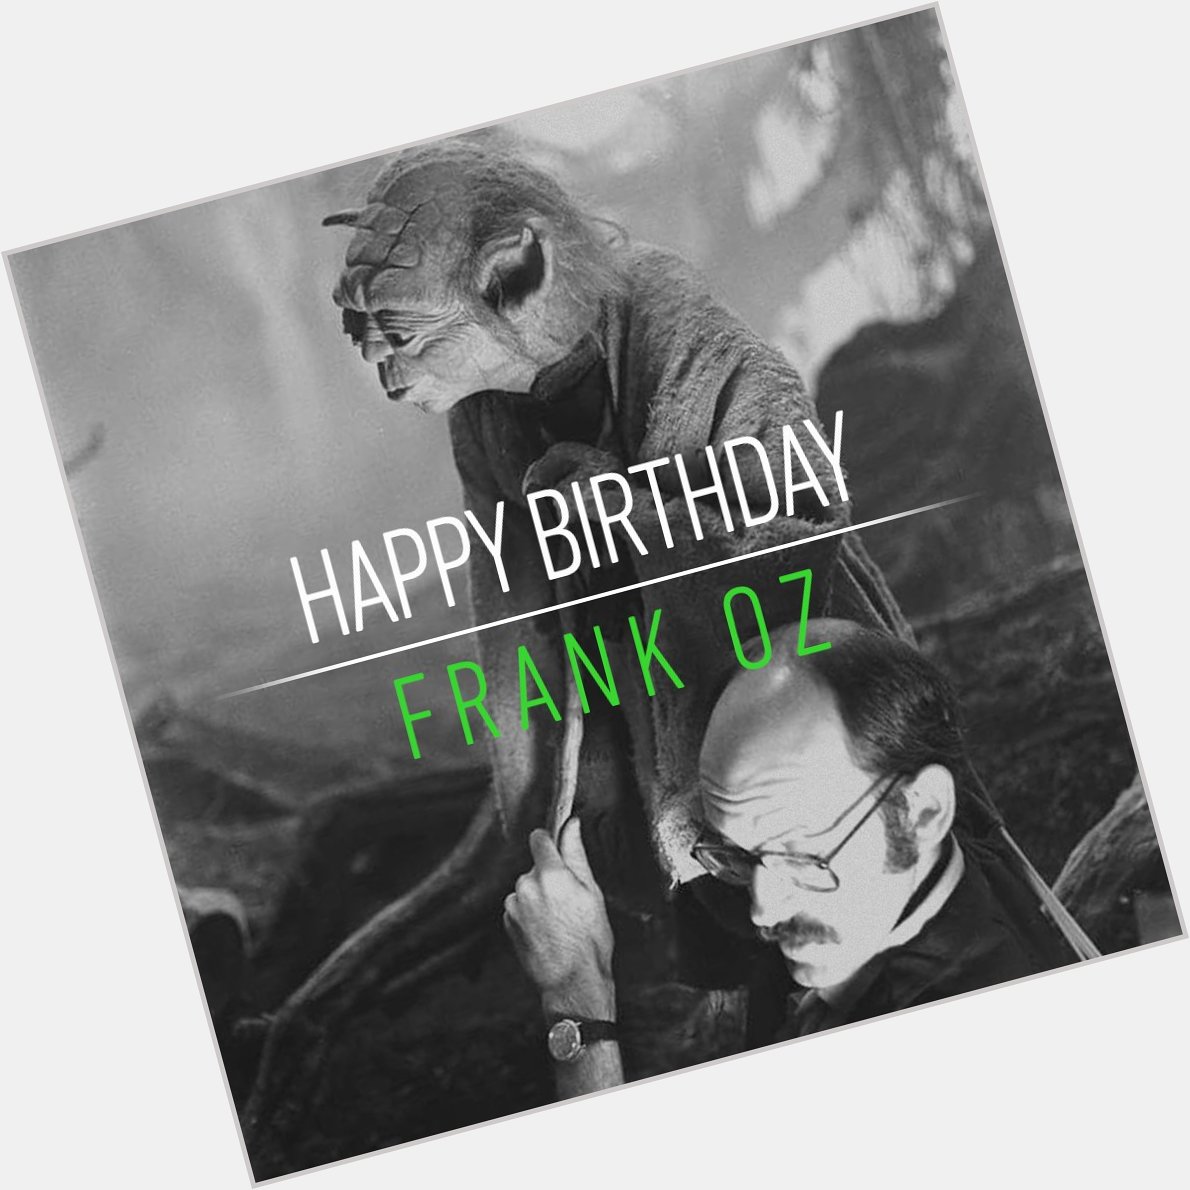 When 75 years old you reach... look as good you will not, hmm? Happy birthday Frank Oz! 